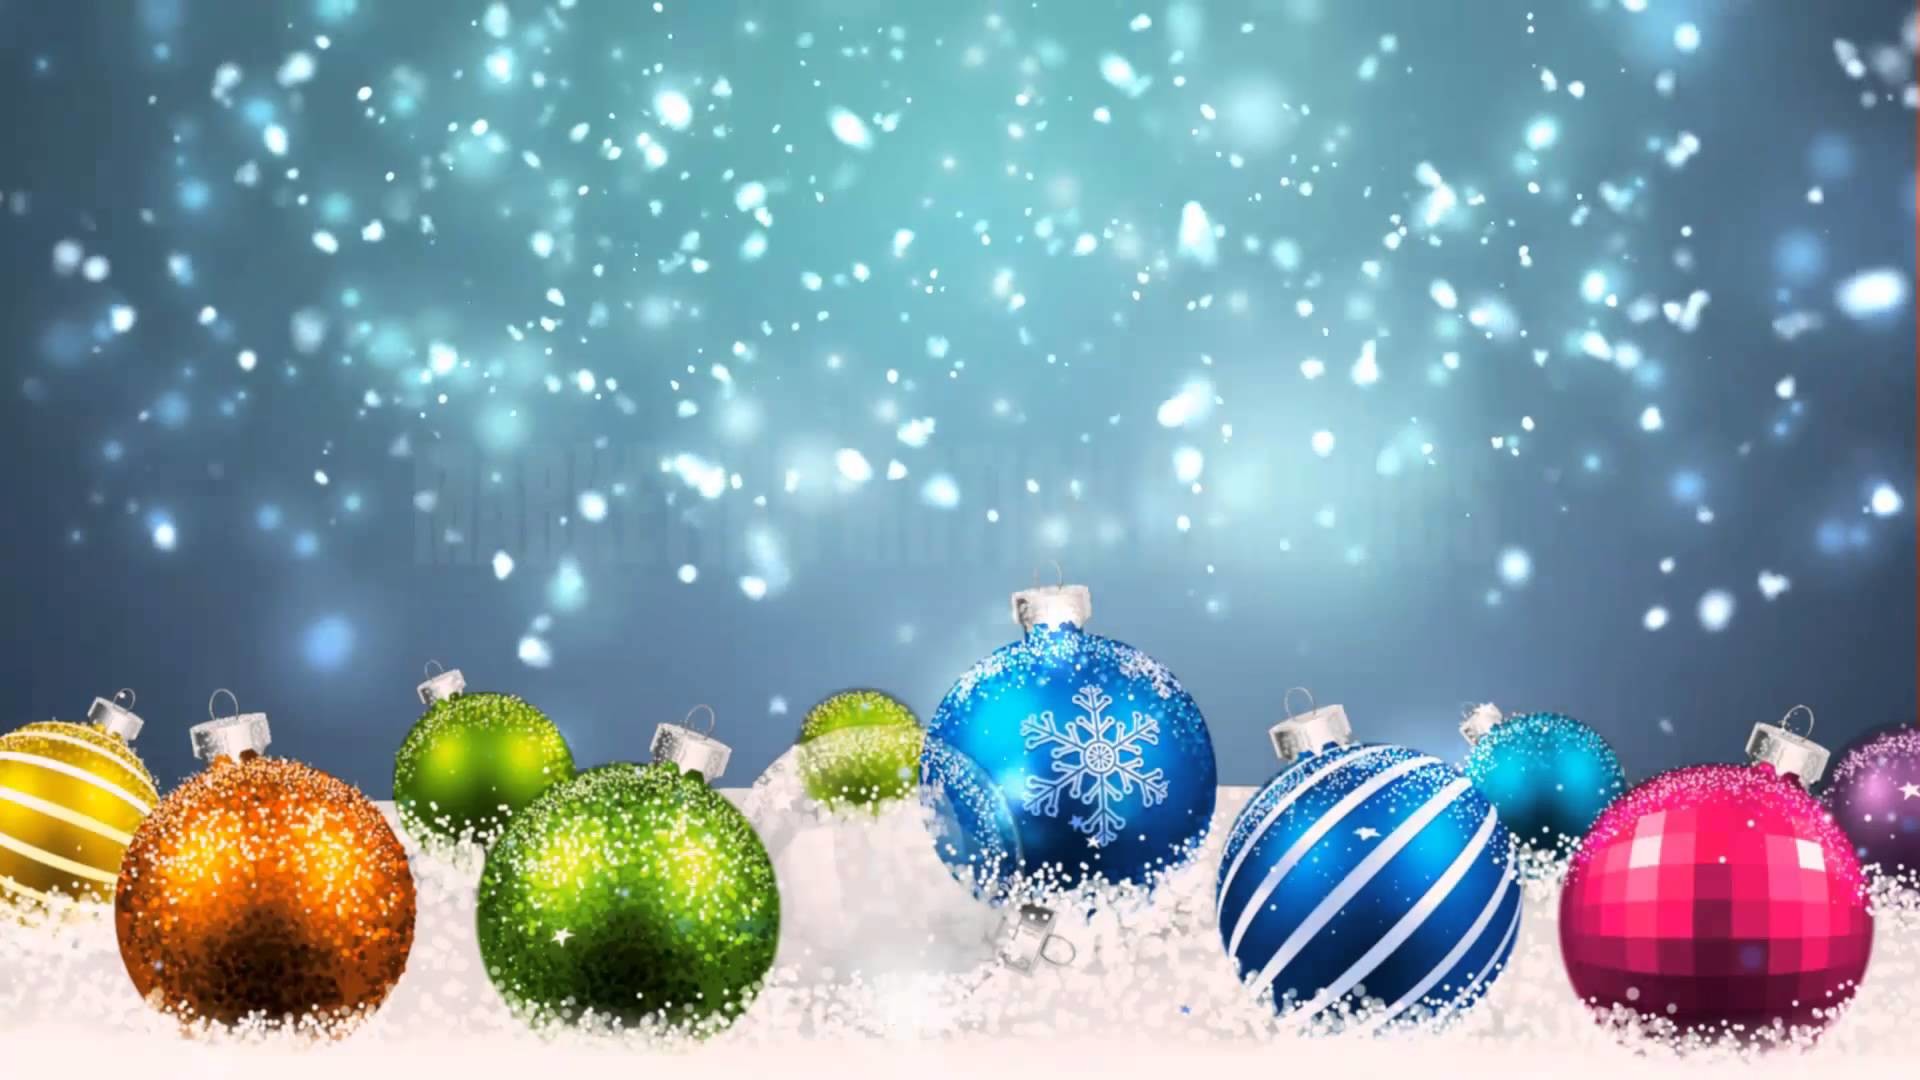 1920x1080 Winter-Christmas Motion Backgrounds - YouTube